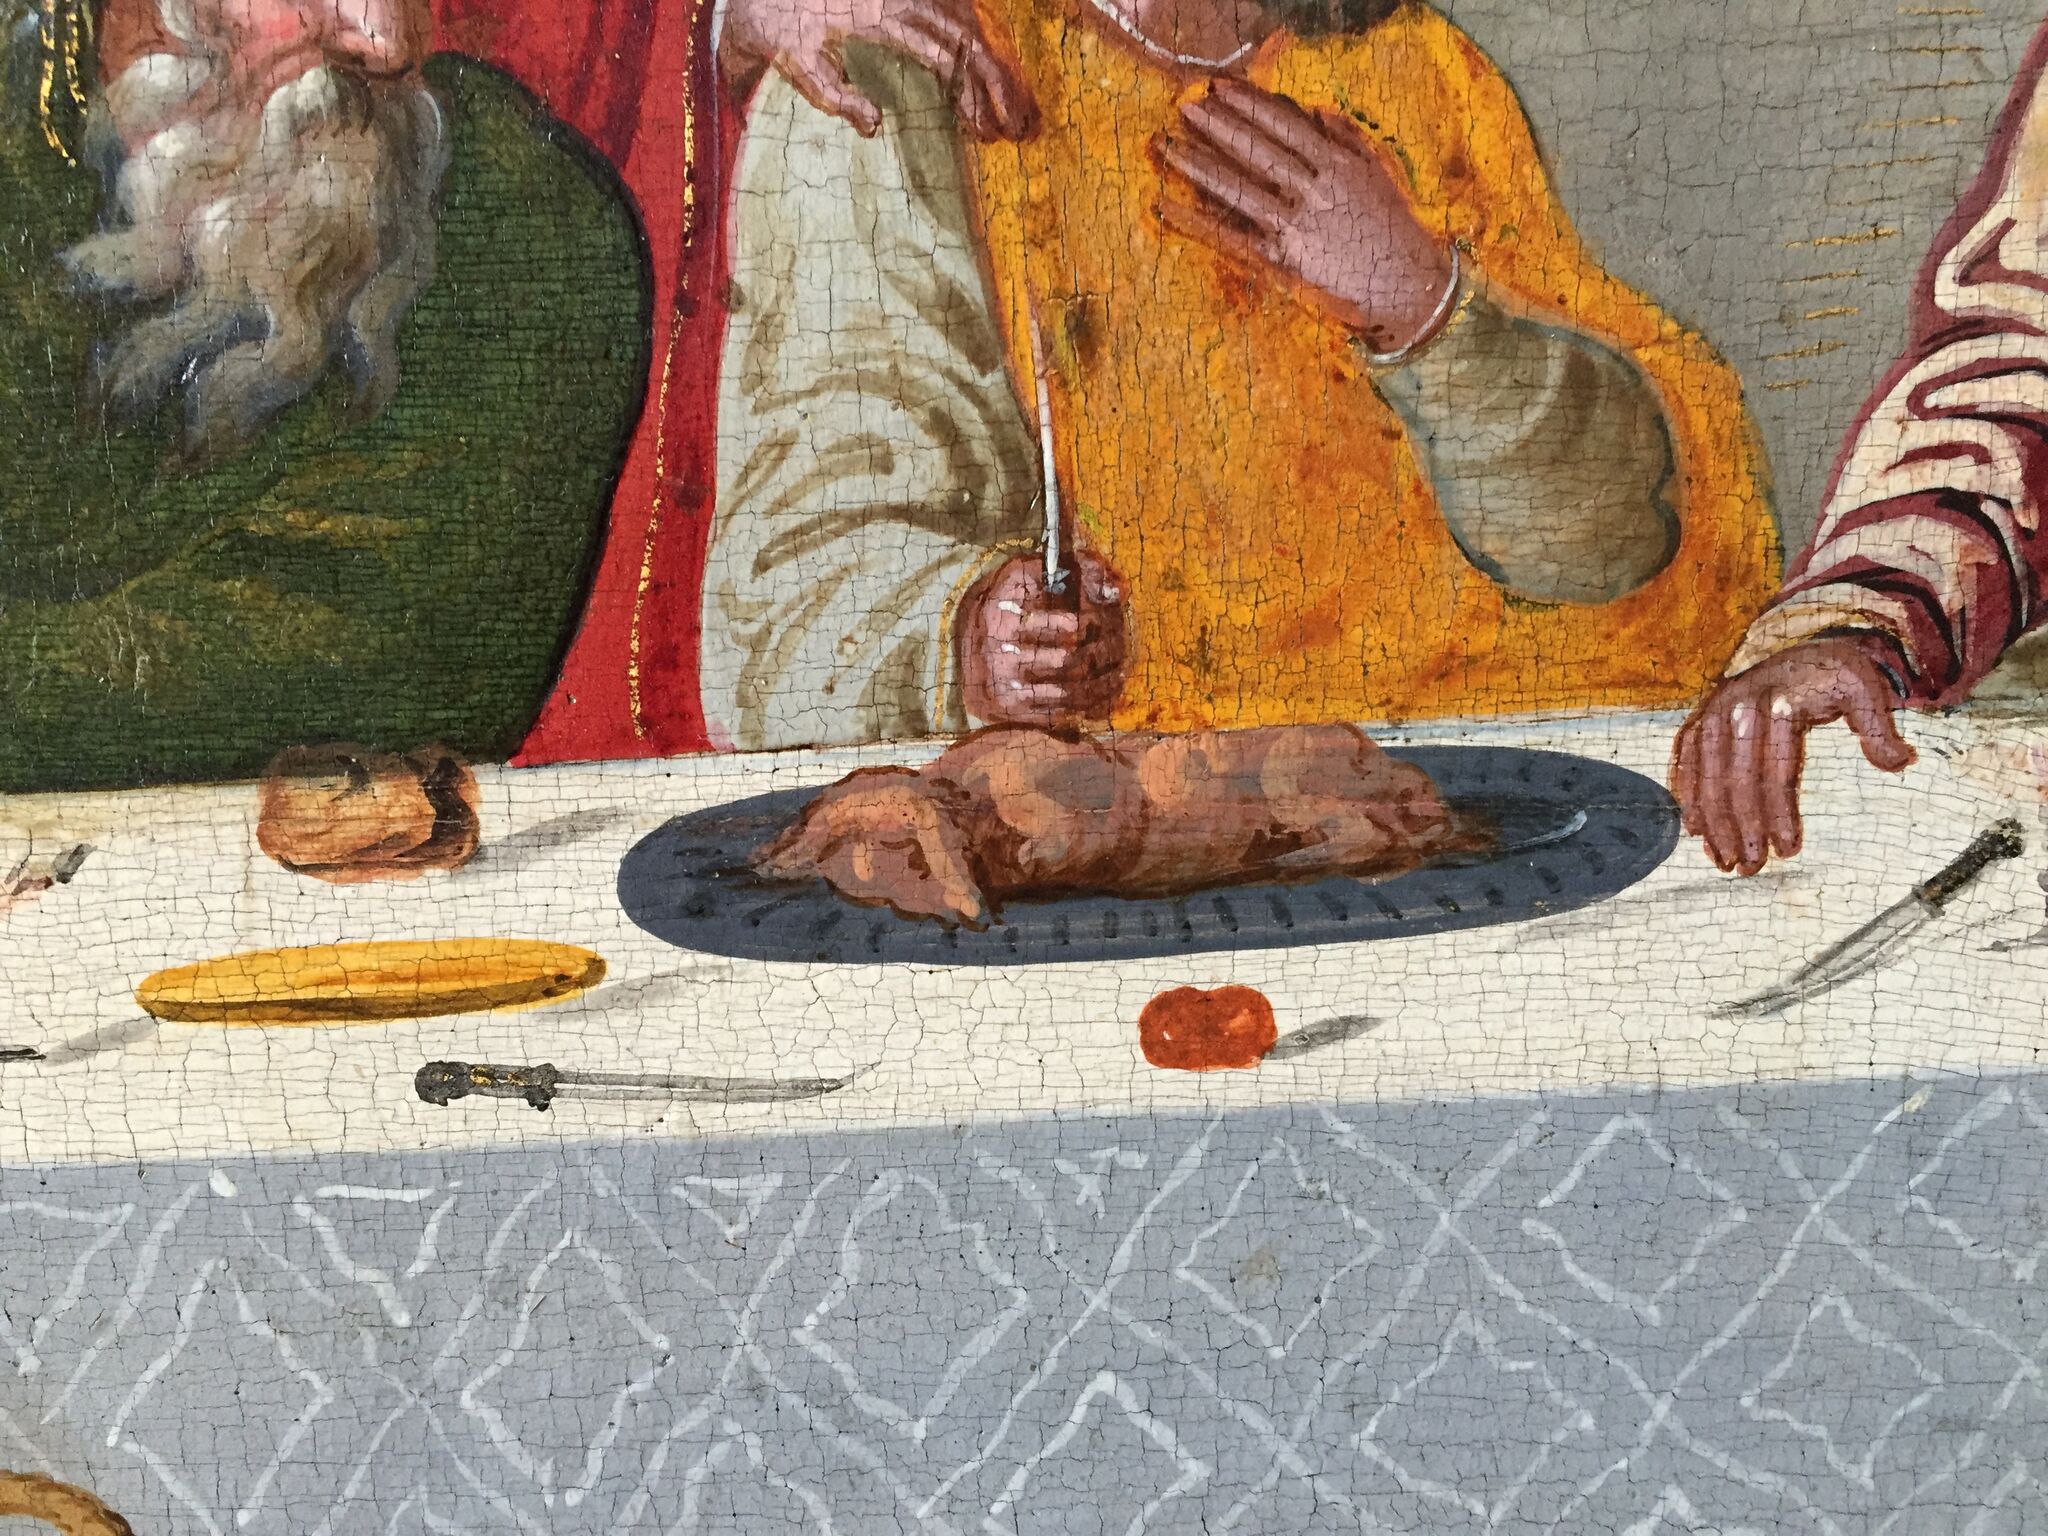 Looking at an image of the Last Supper that is in Venice, one wonders, Could the main course have been mystery meat? Photo credit: M. Ciavardini